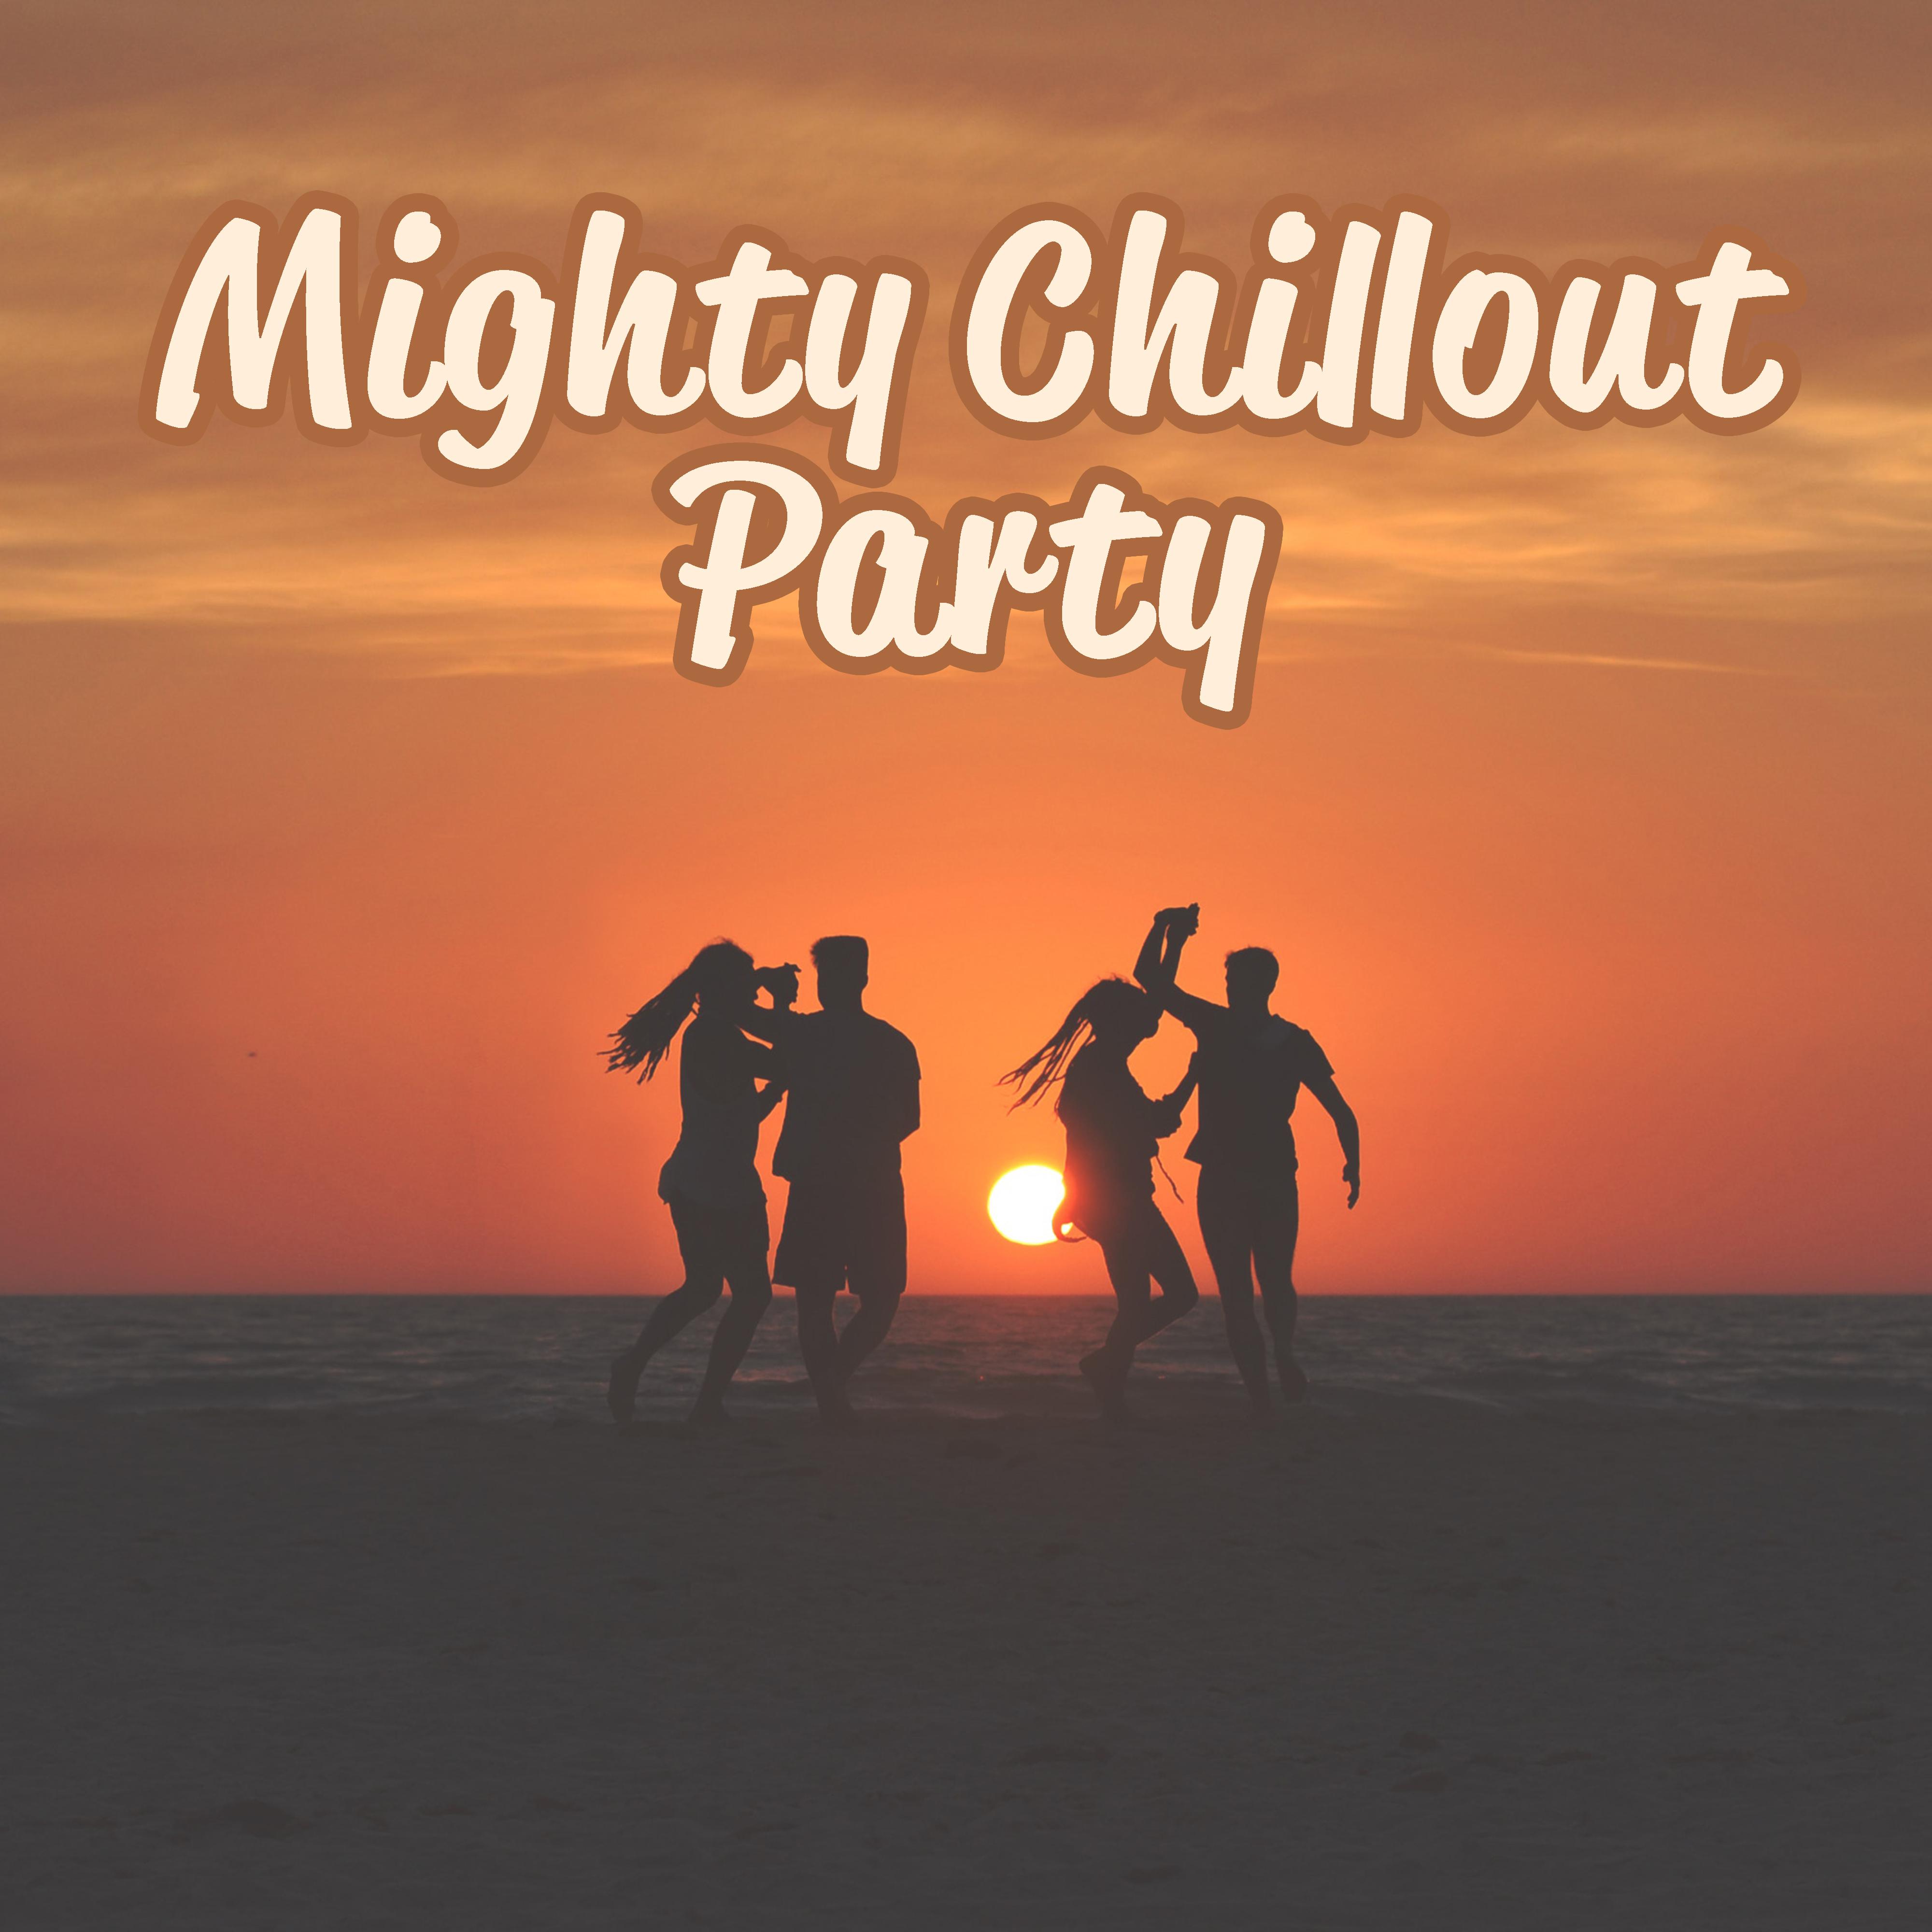 Mighty Chillout Party – New Chill Out 2017, Electronic Music, Deep Vibes, Beach Party, Lounge